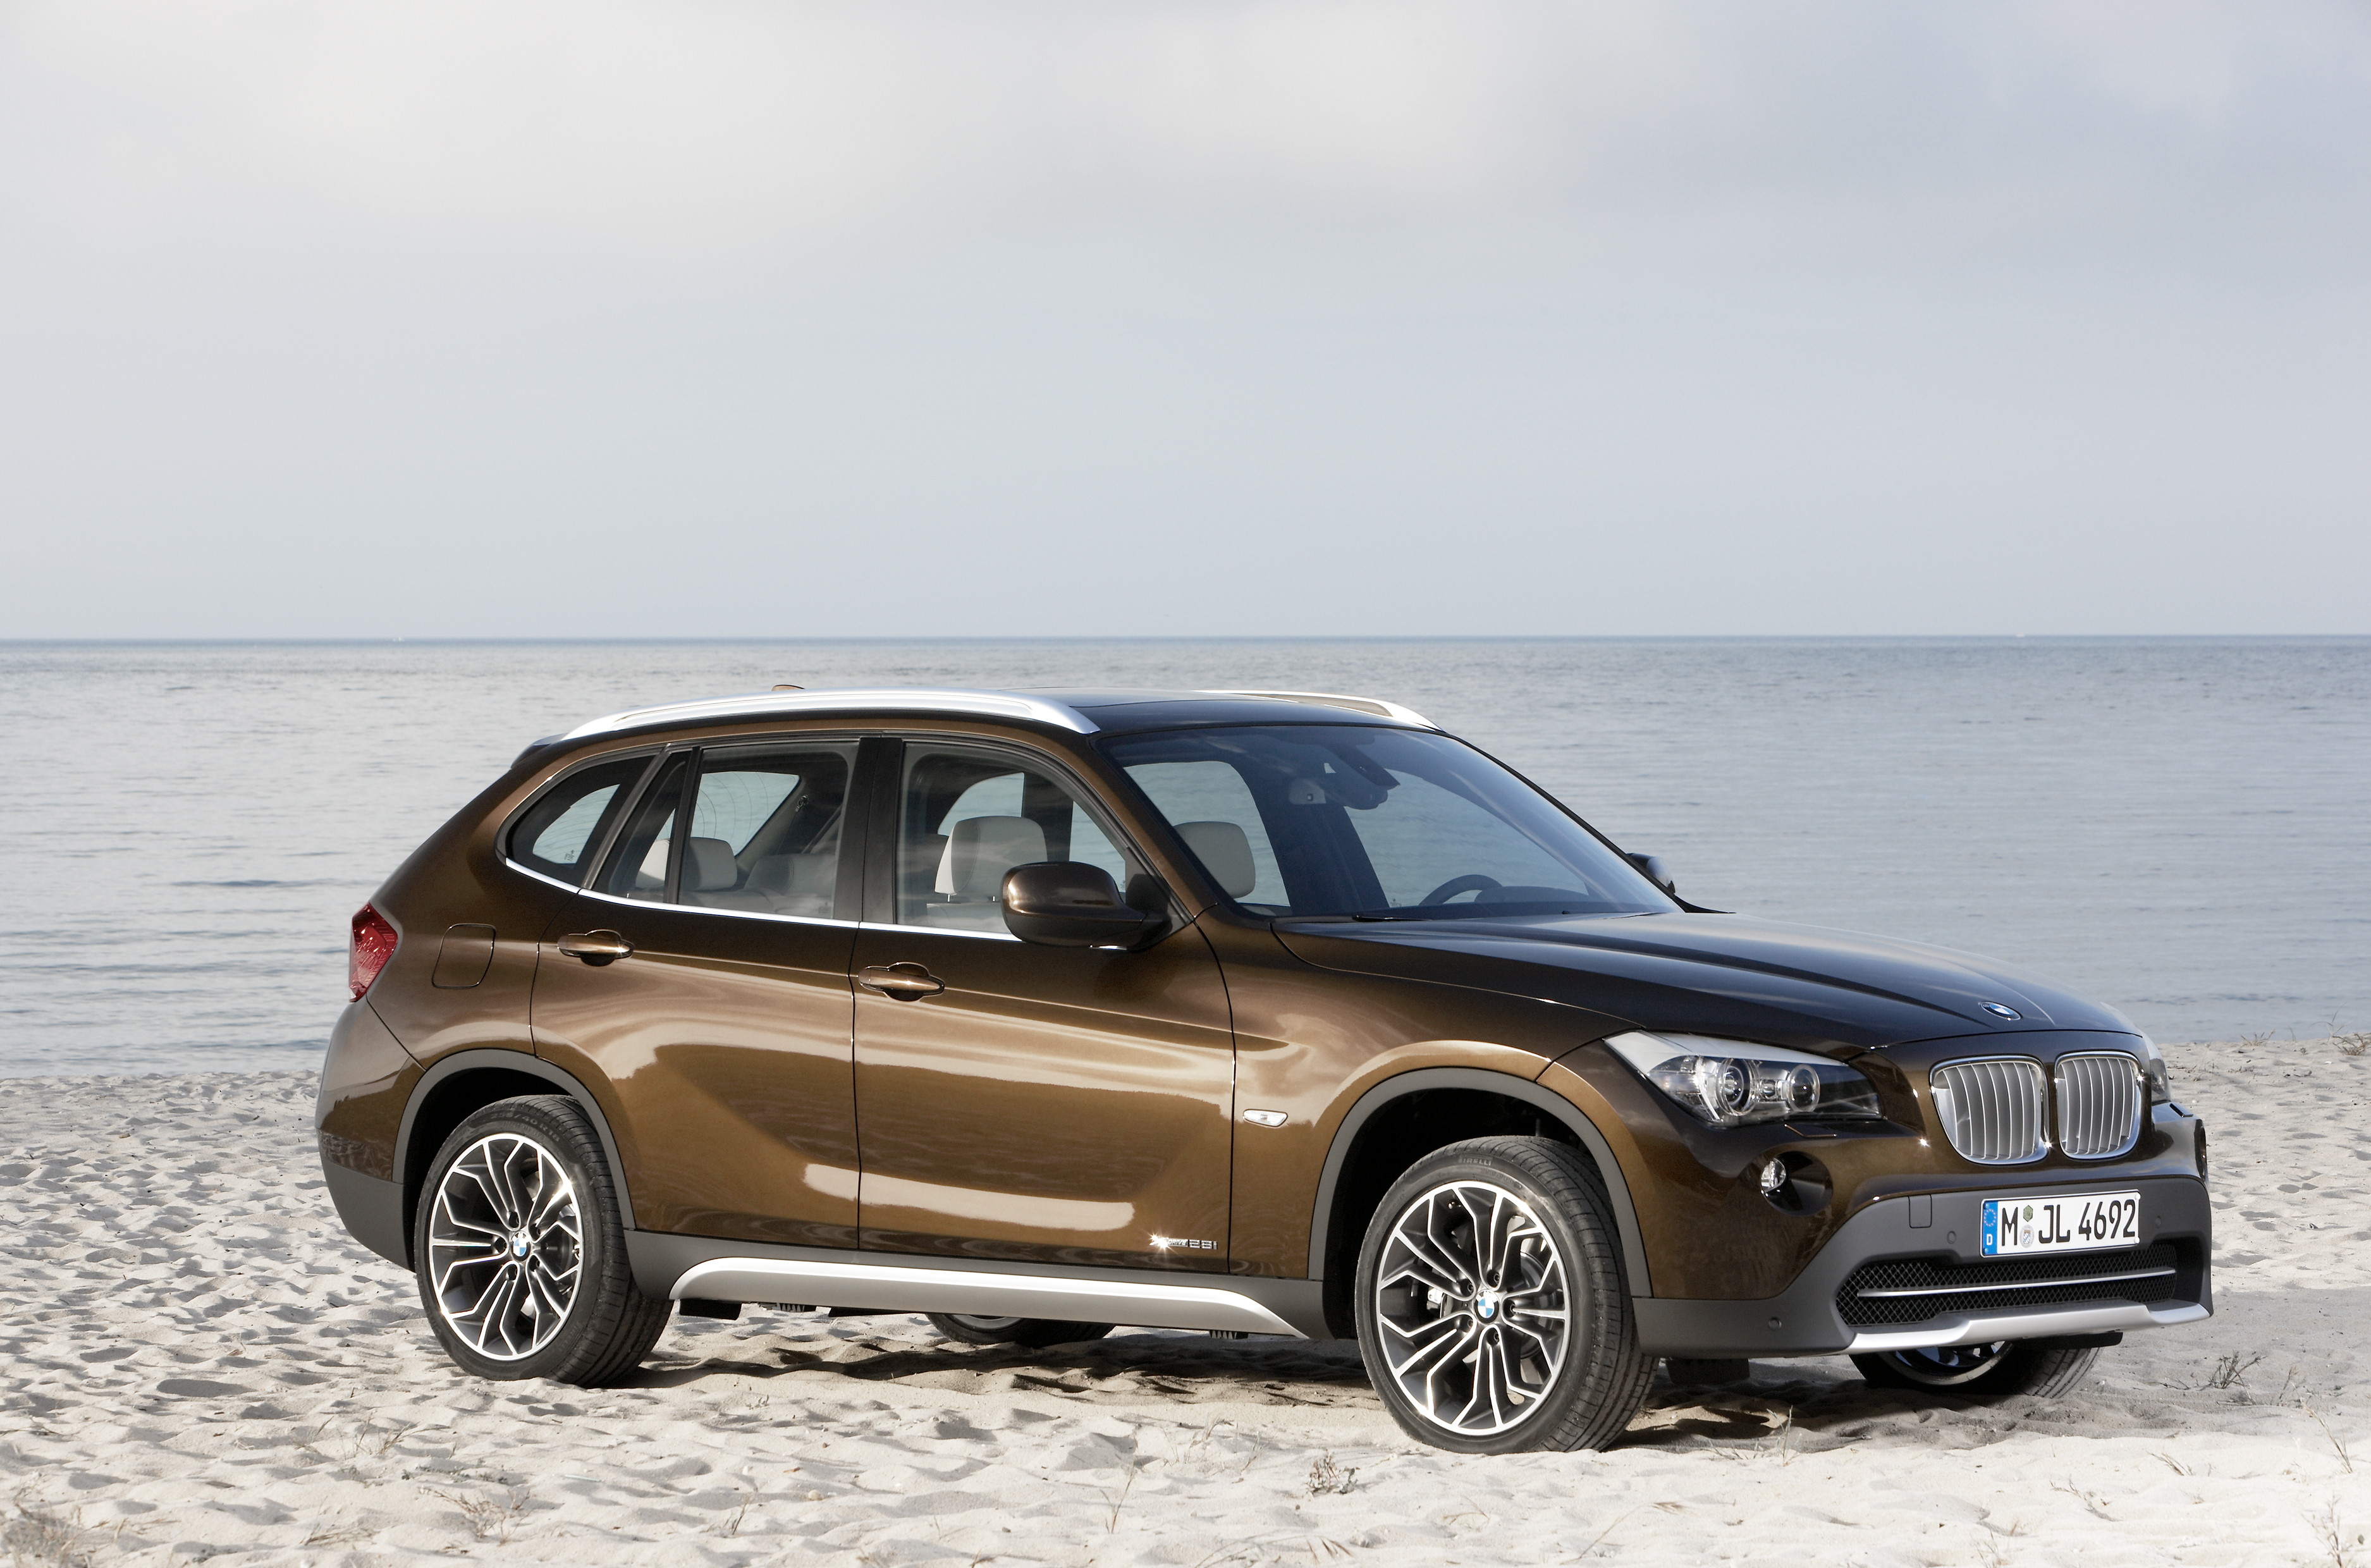 The BMW X1 will debut in Europe this fall with a choice of four engines